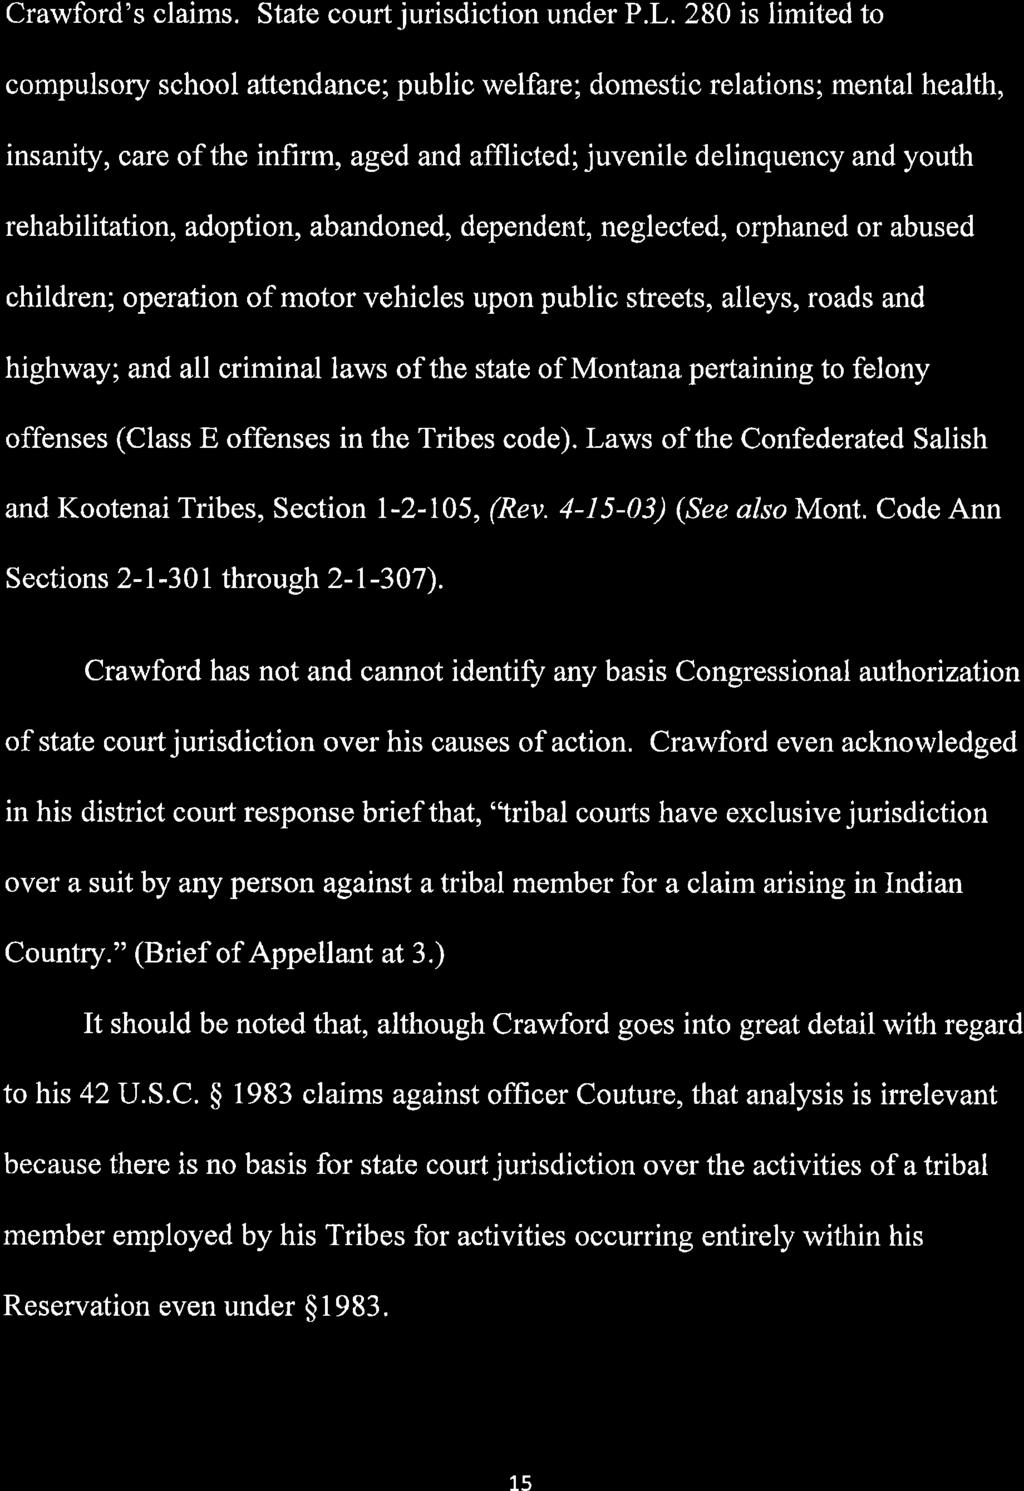 Crawford's claims. State court jurisdiction under P.L.